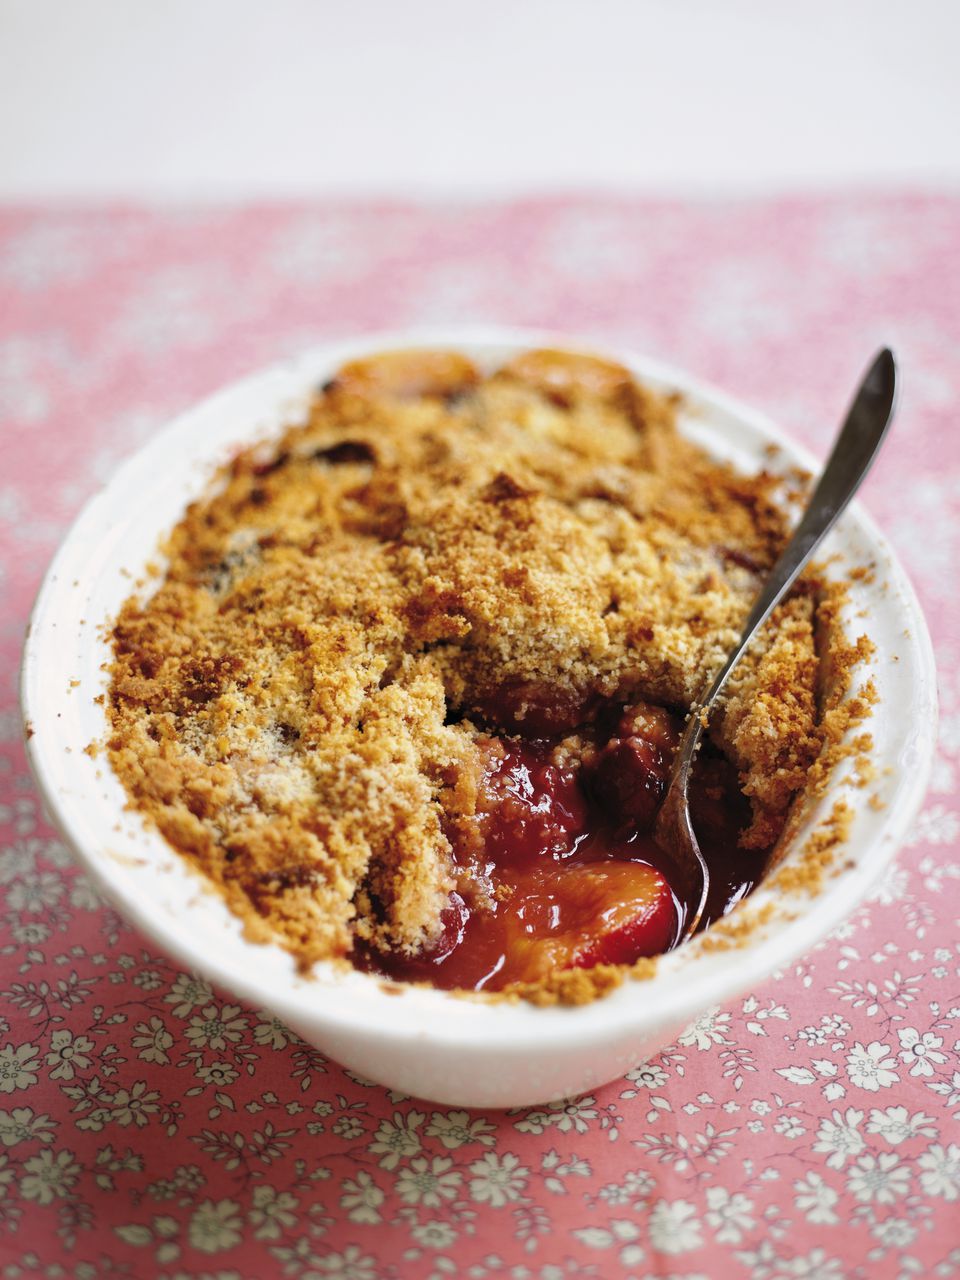 Fresh Plum Crumble With Spiced Crumb Topping